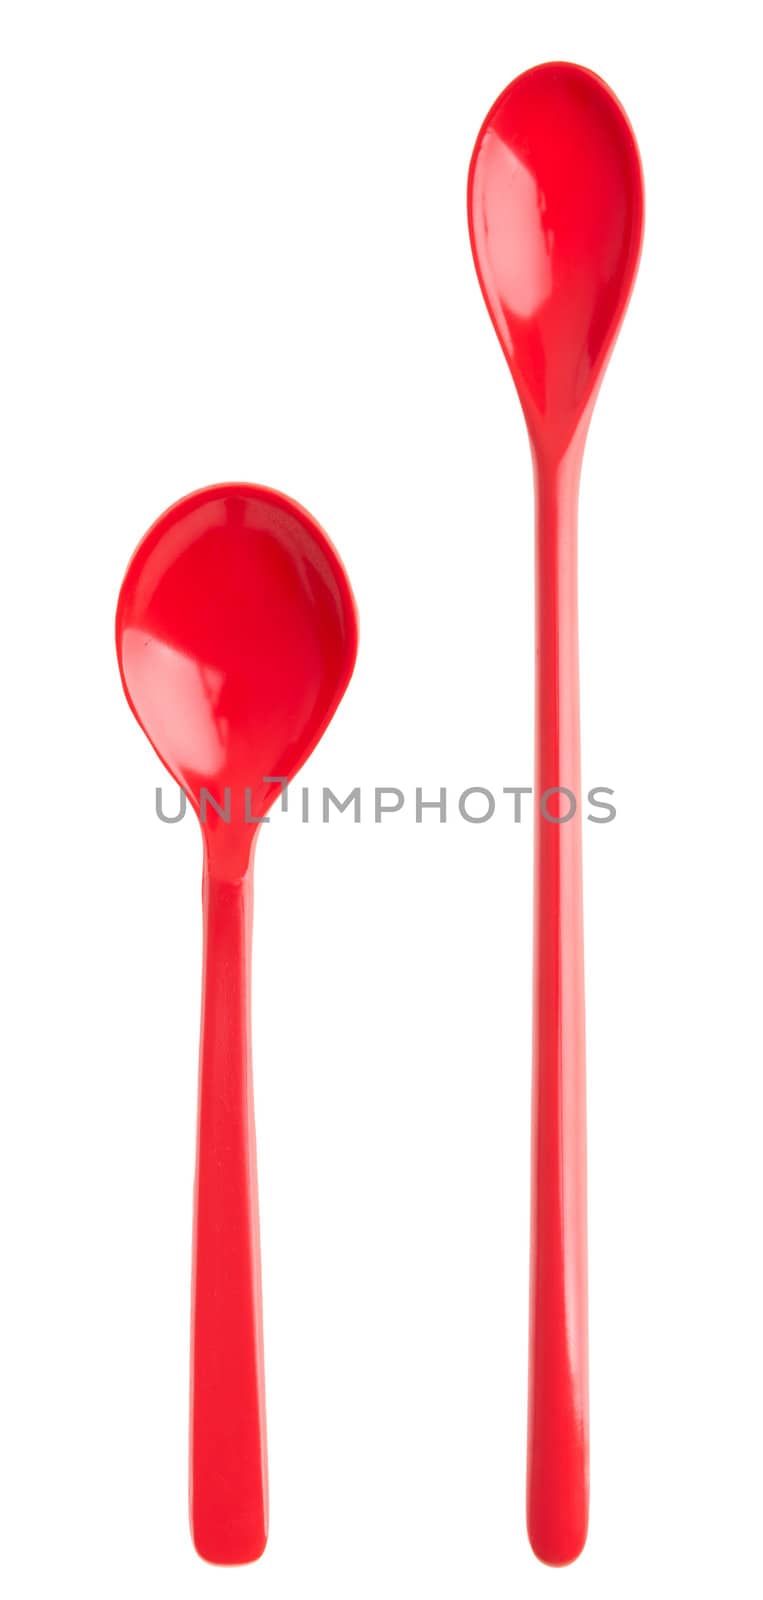 small and big porcelain spoons isolated on white background